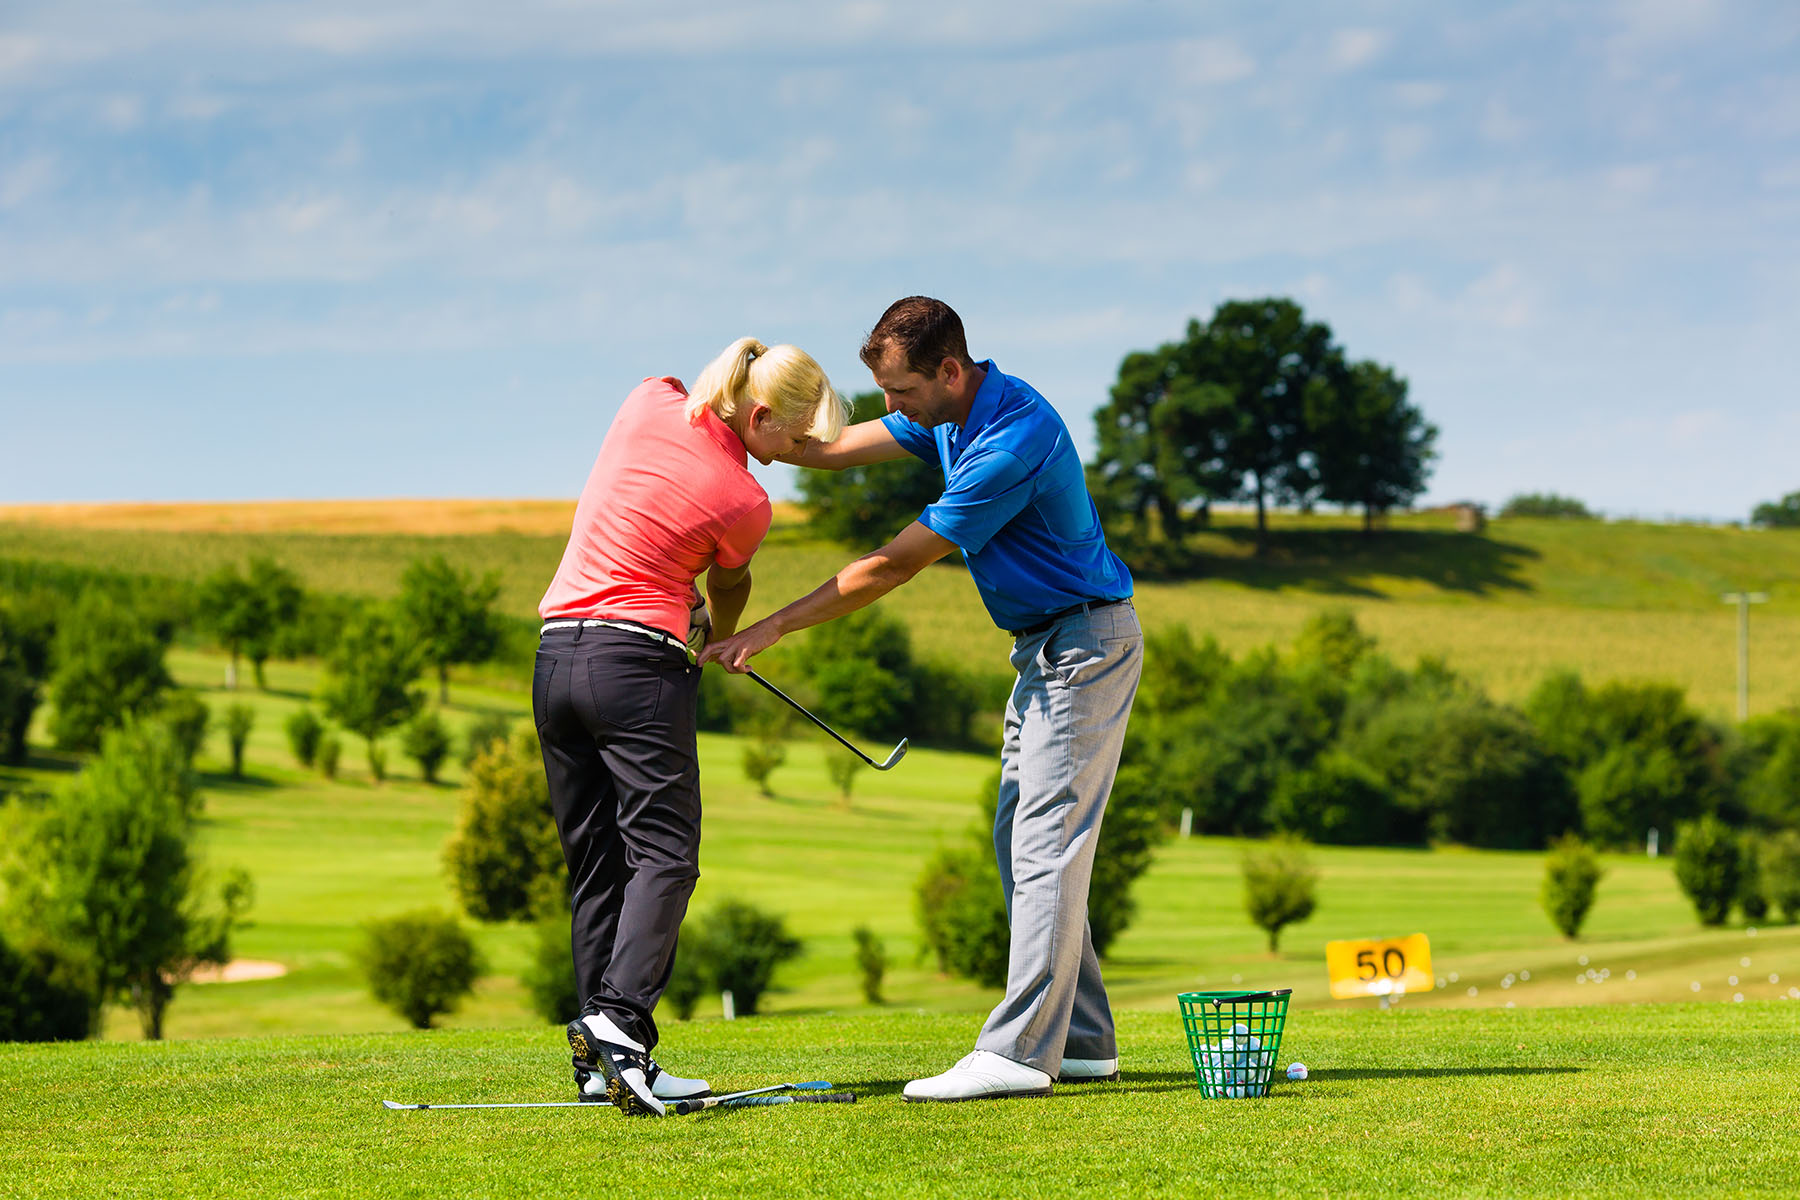 A woman learning to play golf with a trainer on a golf course